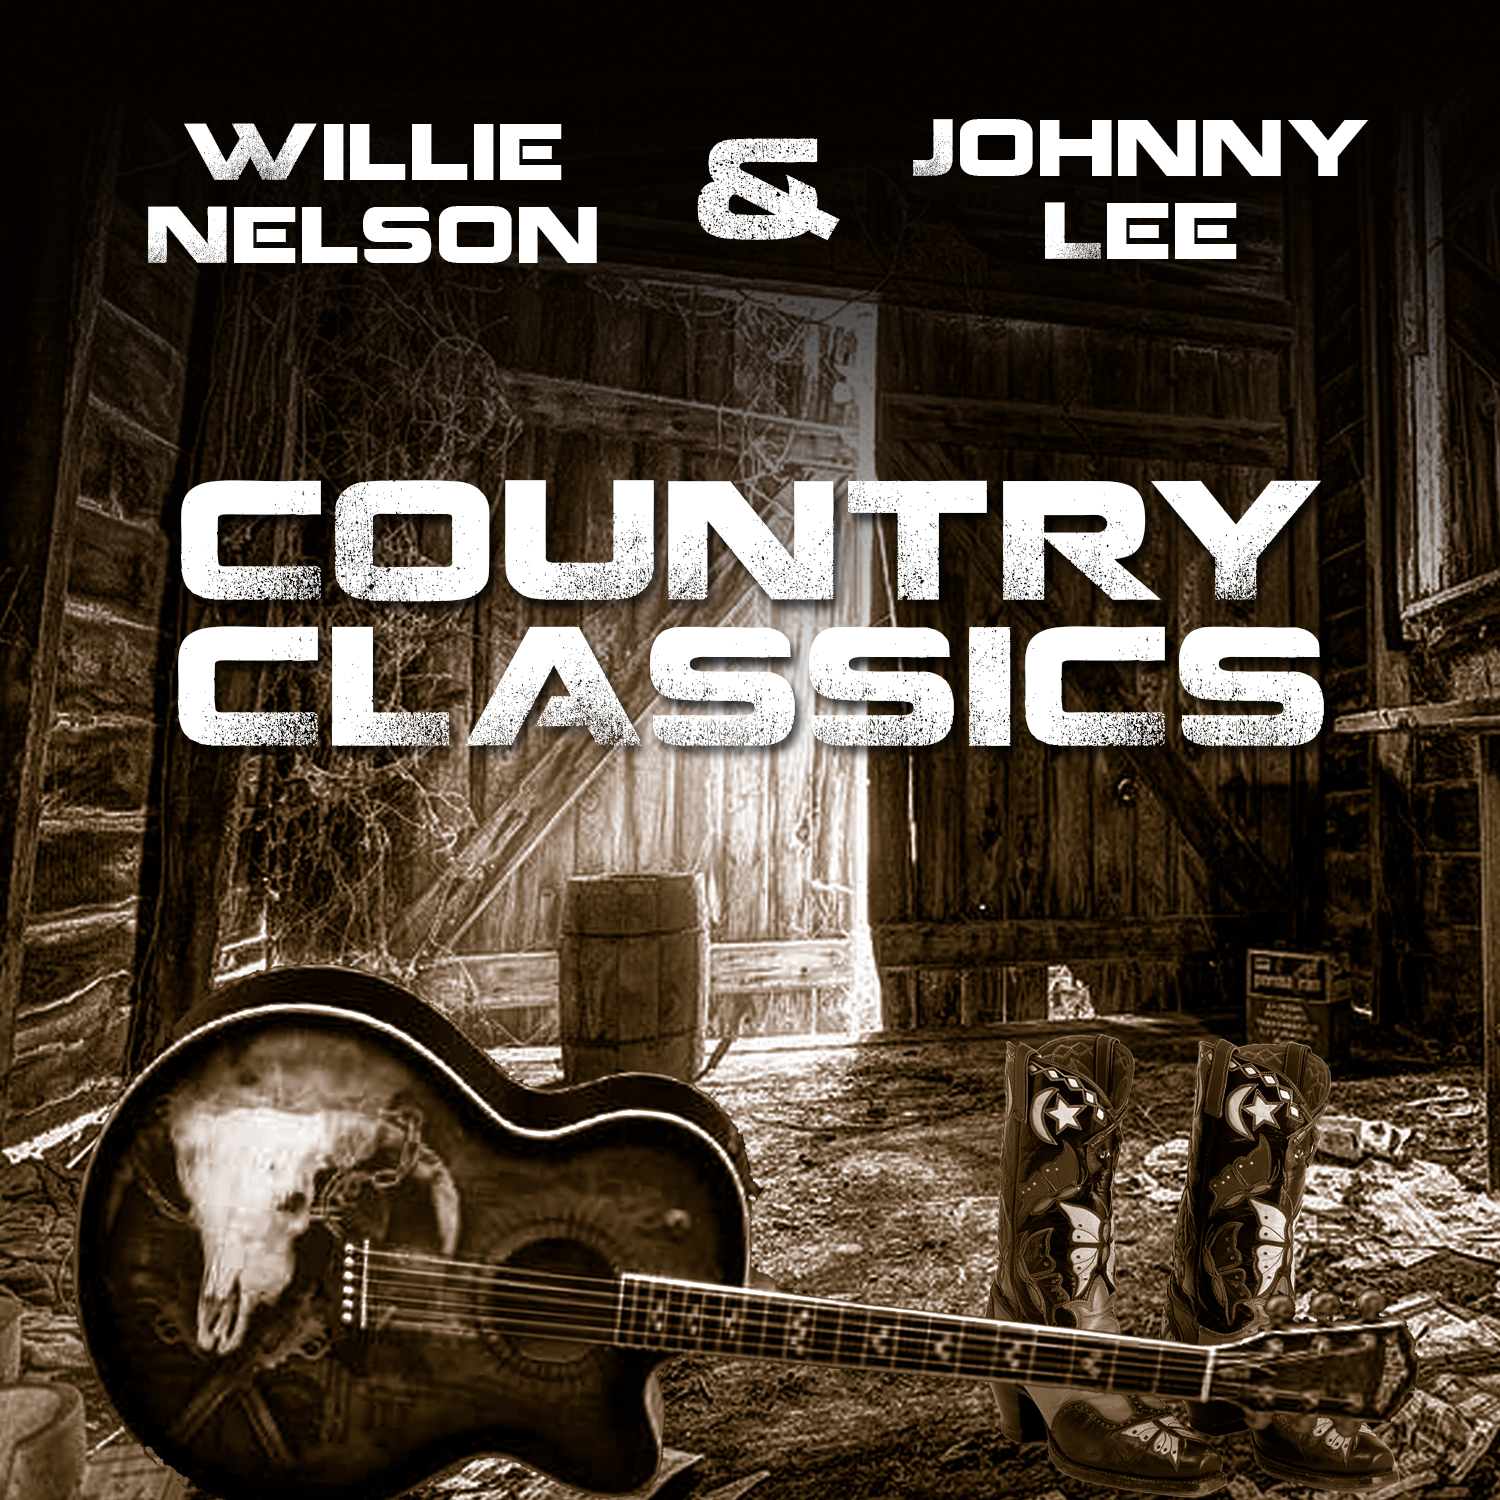 Willie Nelson & Johnny Lee - Country Classics